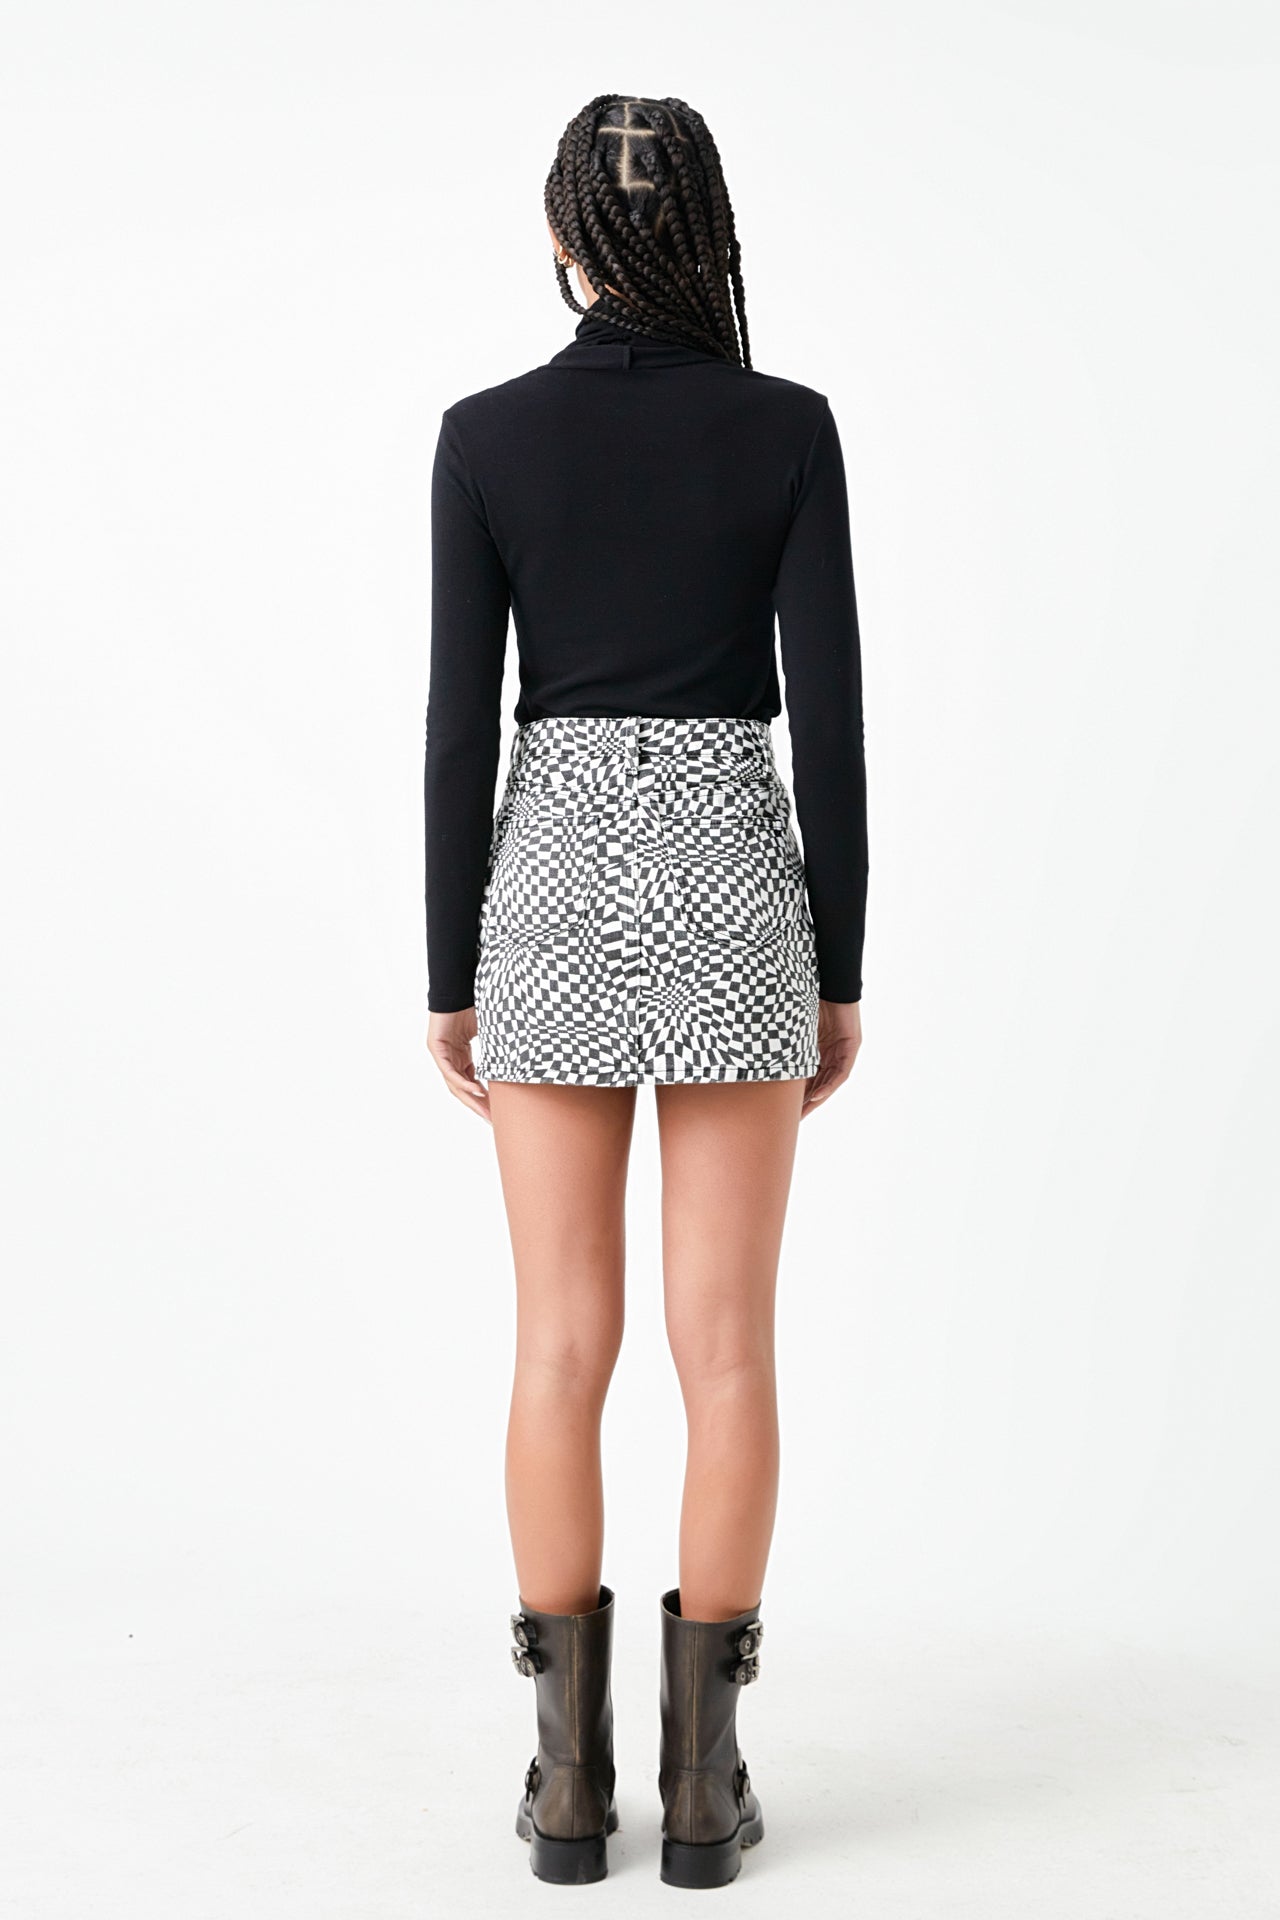 GREY LAB - High Waisted Warped Mini Skirt - SKIRTS available at Objectrare